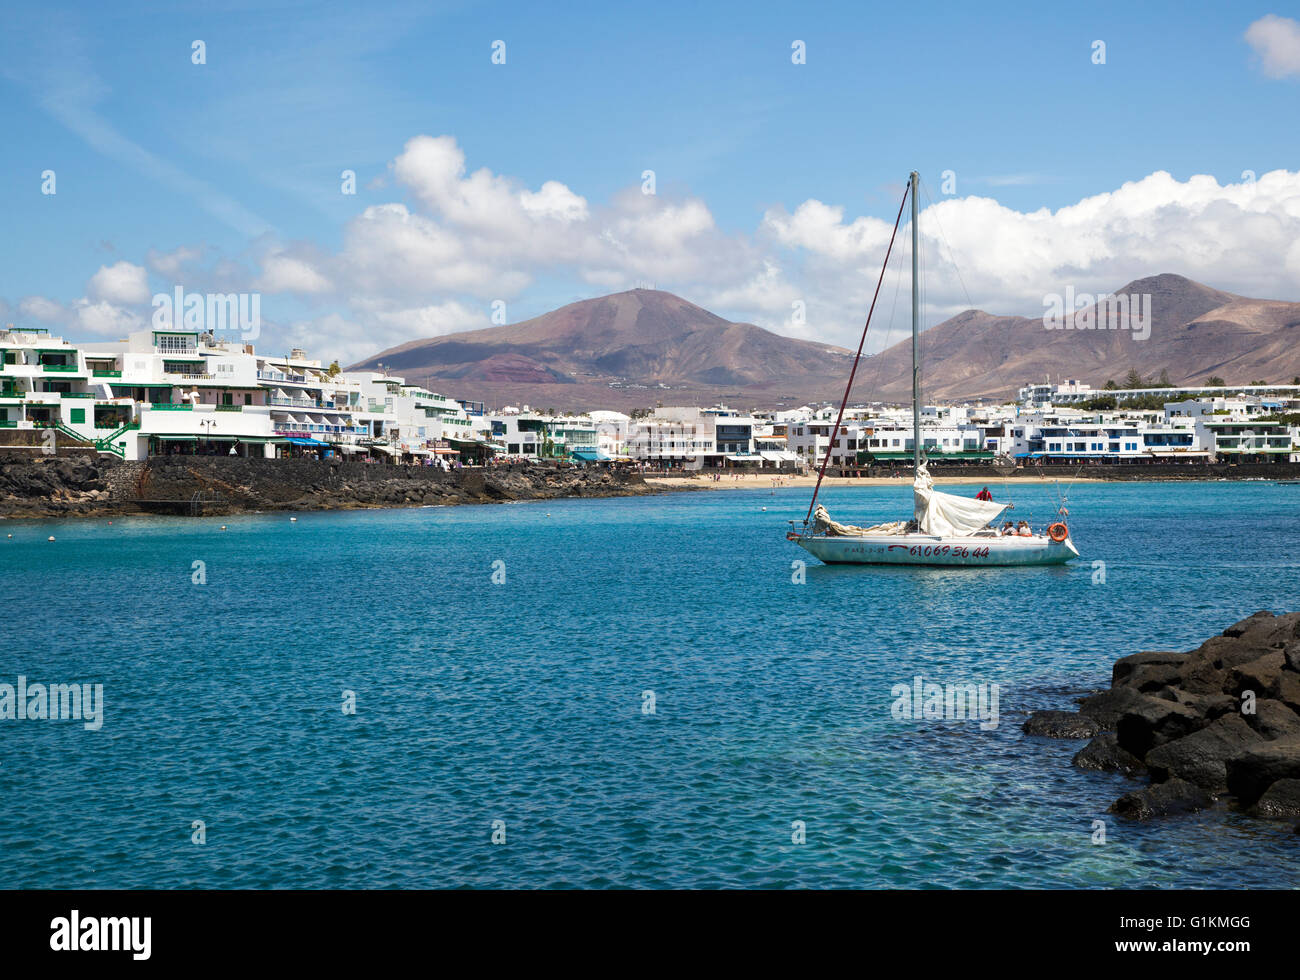 Yacht arriving in harbour at Playa Blanca, Lanzarote, Canary Islands, Spain Stock Photo